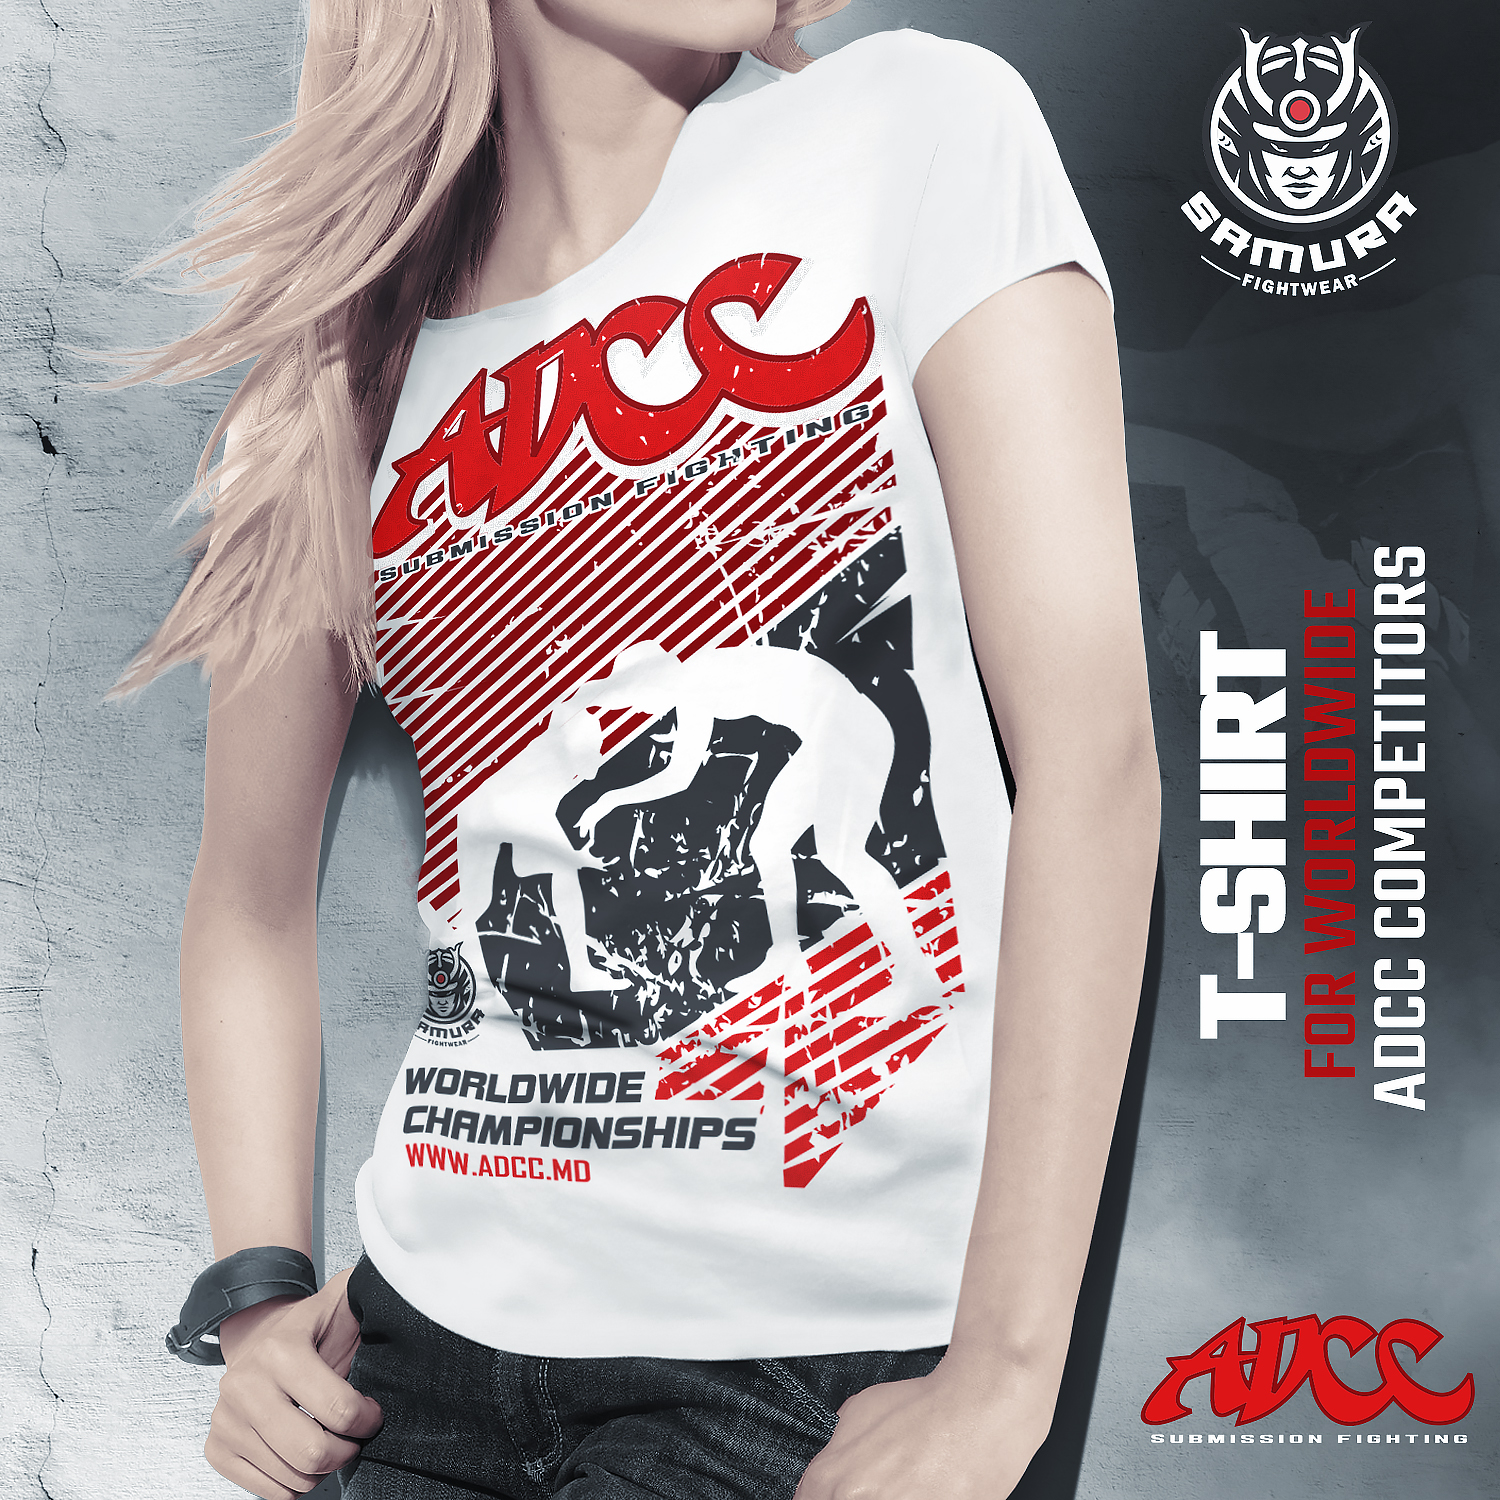 ADCC COMPETITORS T-SHIRT (Fitted Woman)